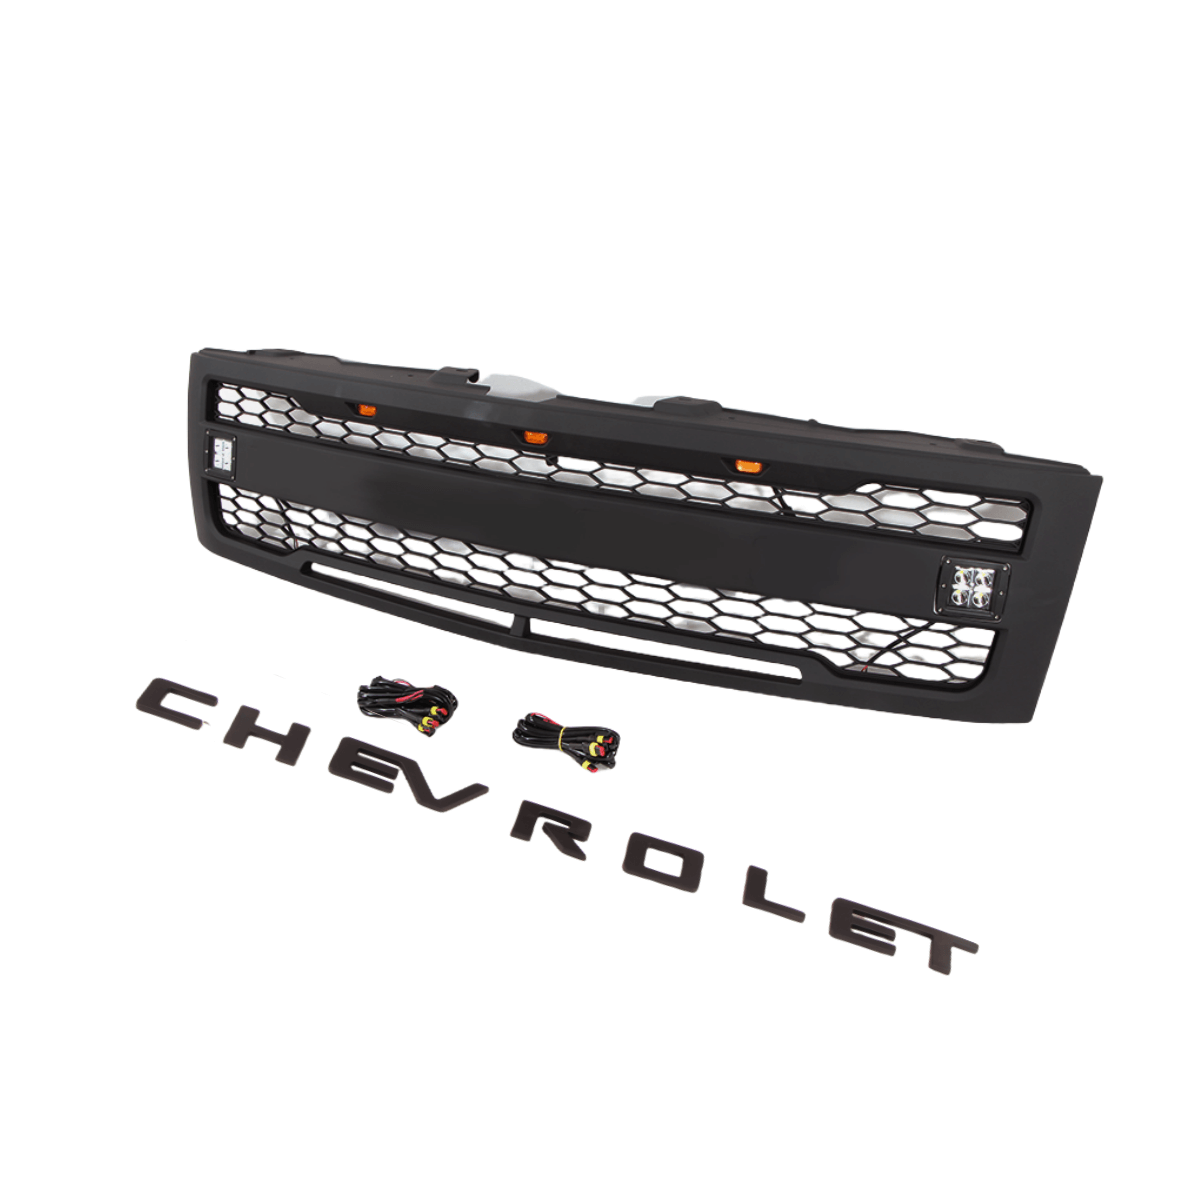 {WildWell}{ Chevrolet Grille}-{ Chevrolet Silverado Grille 2007-2013/3}-right